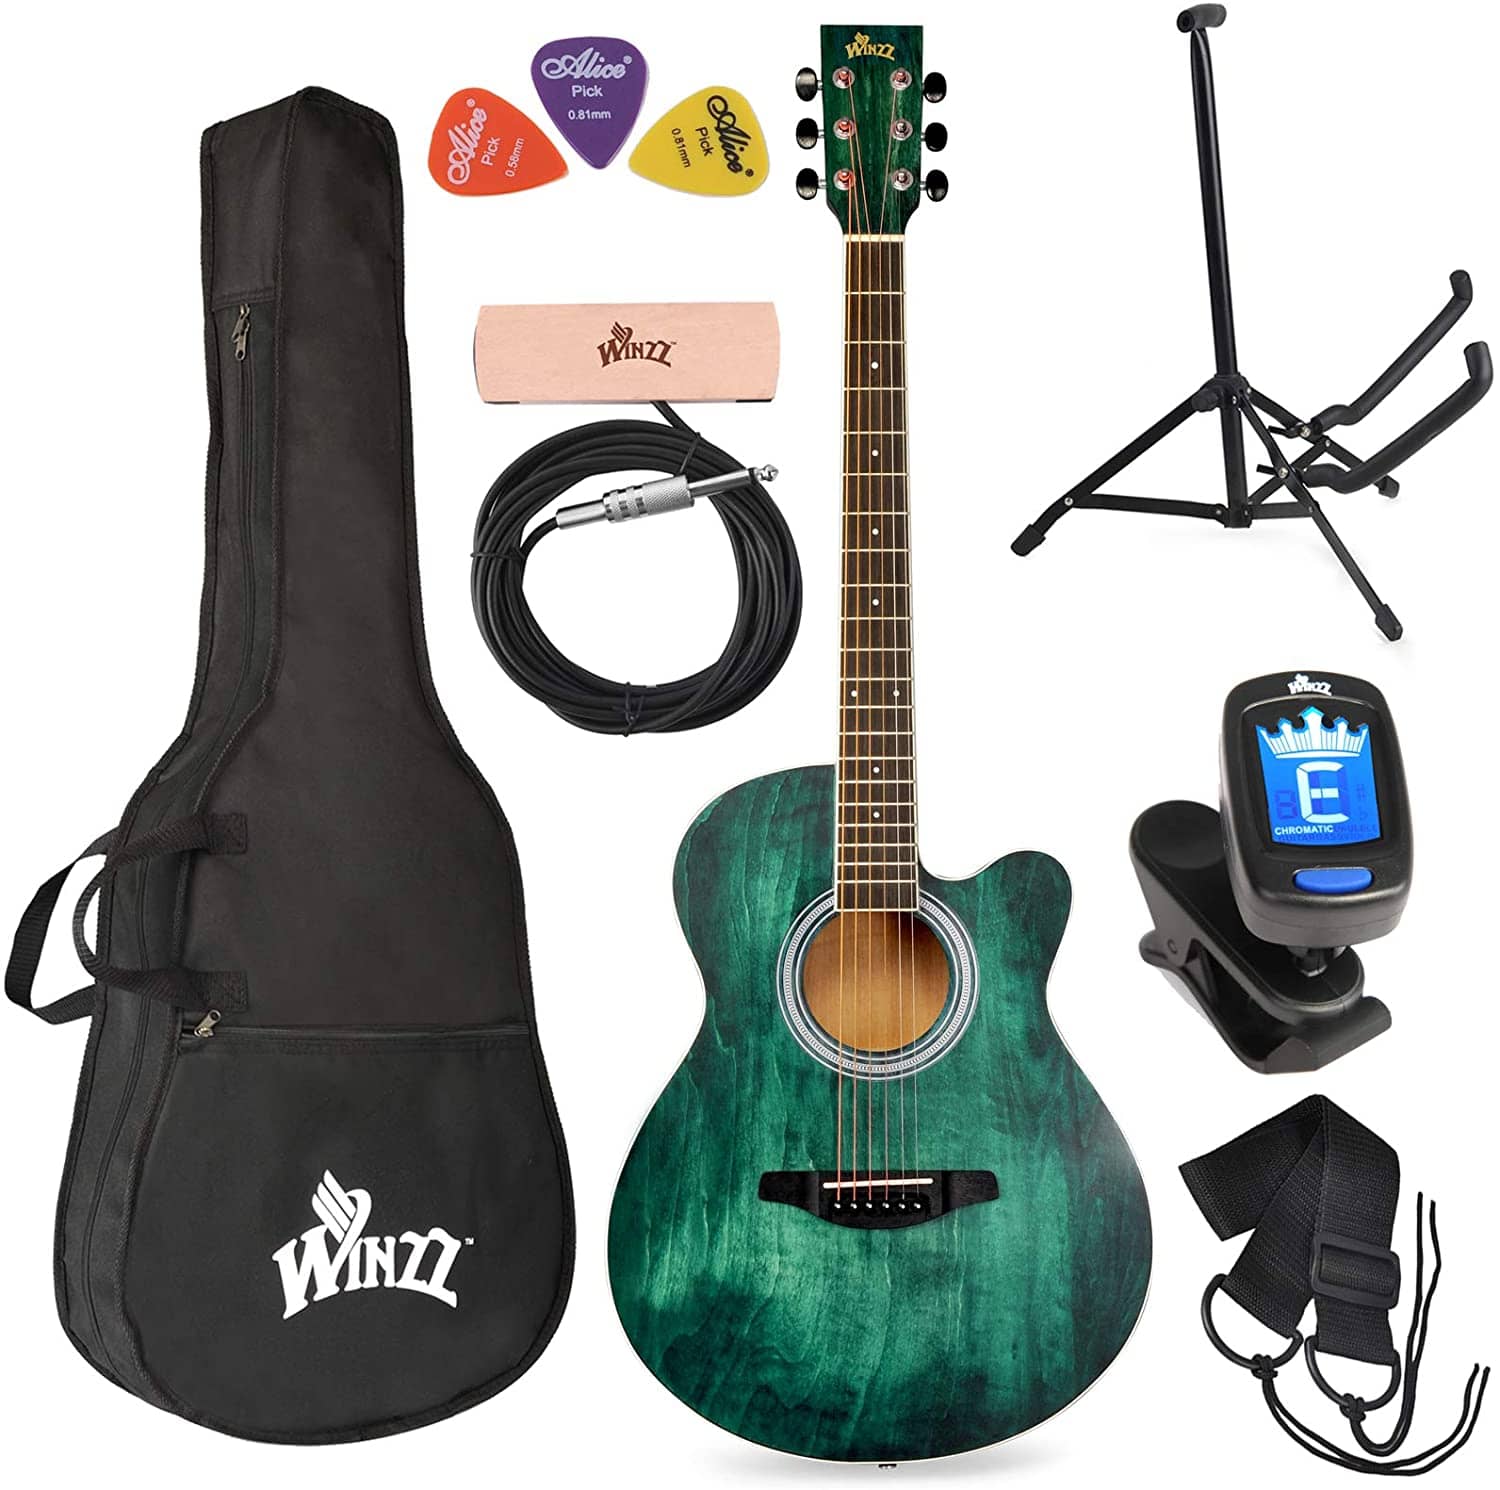 WINZZ 3/4 Dreadnought Acoustic Guitar Bundle with Online Lessons, Bag, Metronome Tuner, Wall-mounted Hanger, Strap, Picks & Cleaning Cloth,36 Inches Right Handed, Dark Hunter Green 35